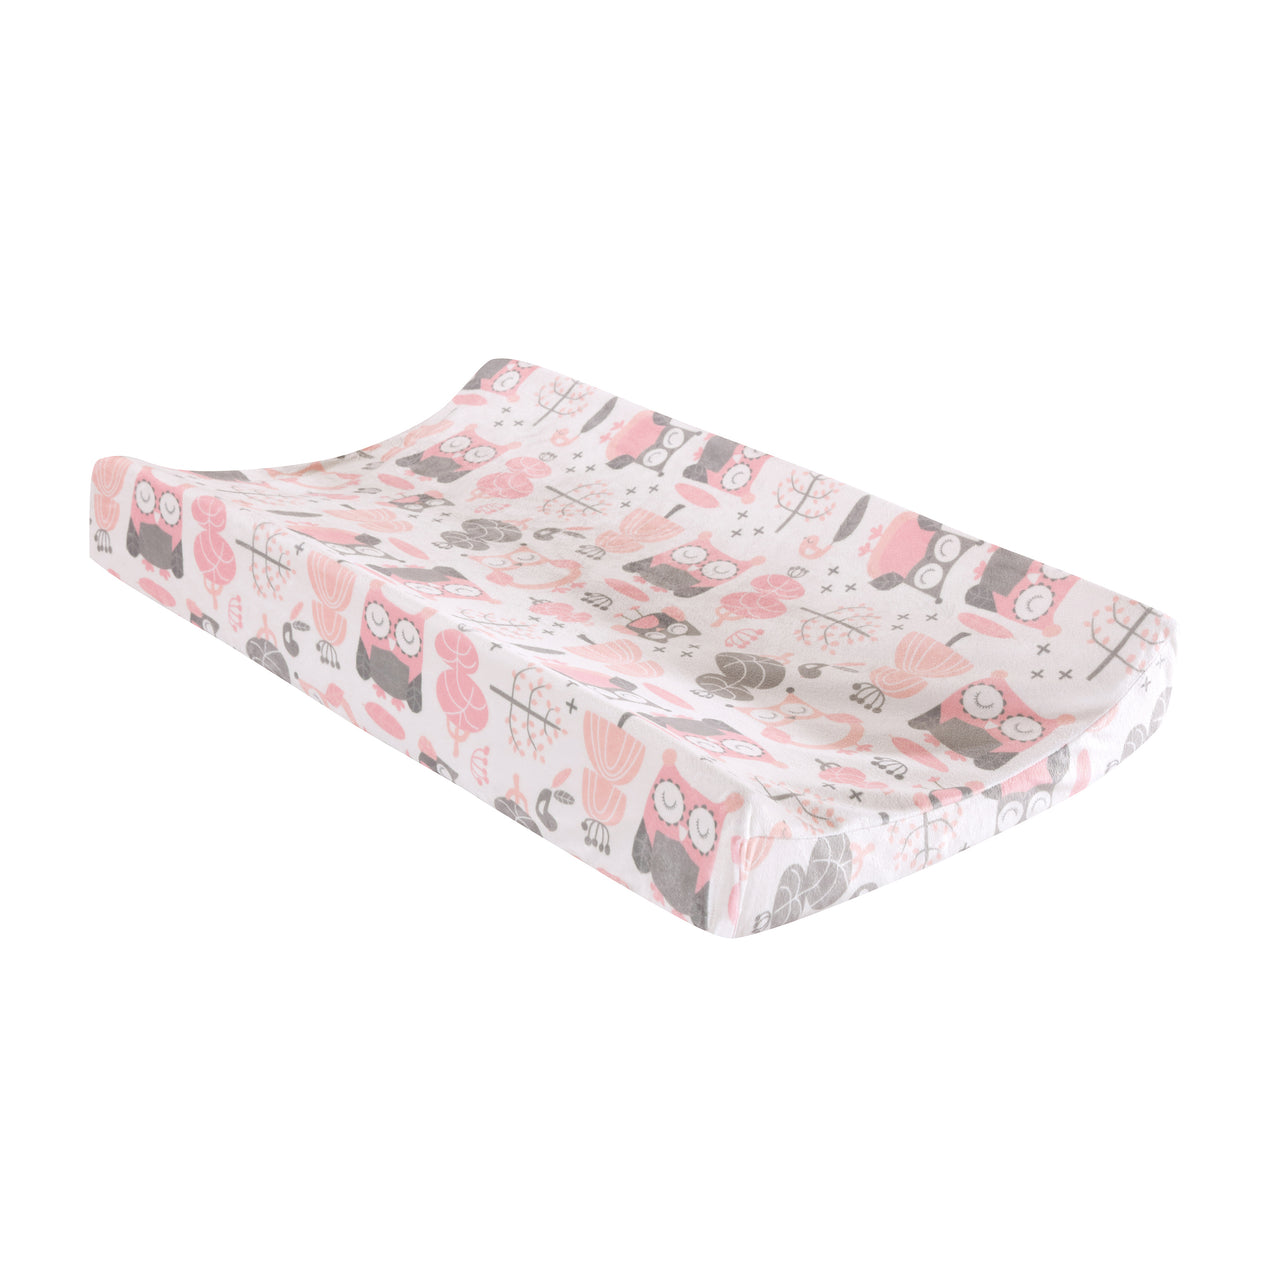 Night Owl Changing Pad Cover - Pink